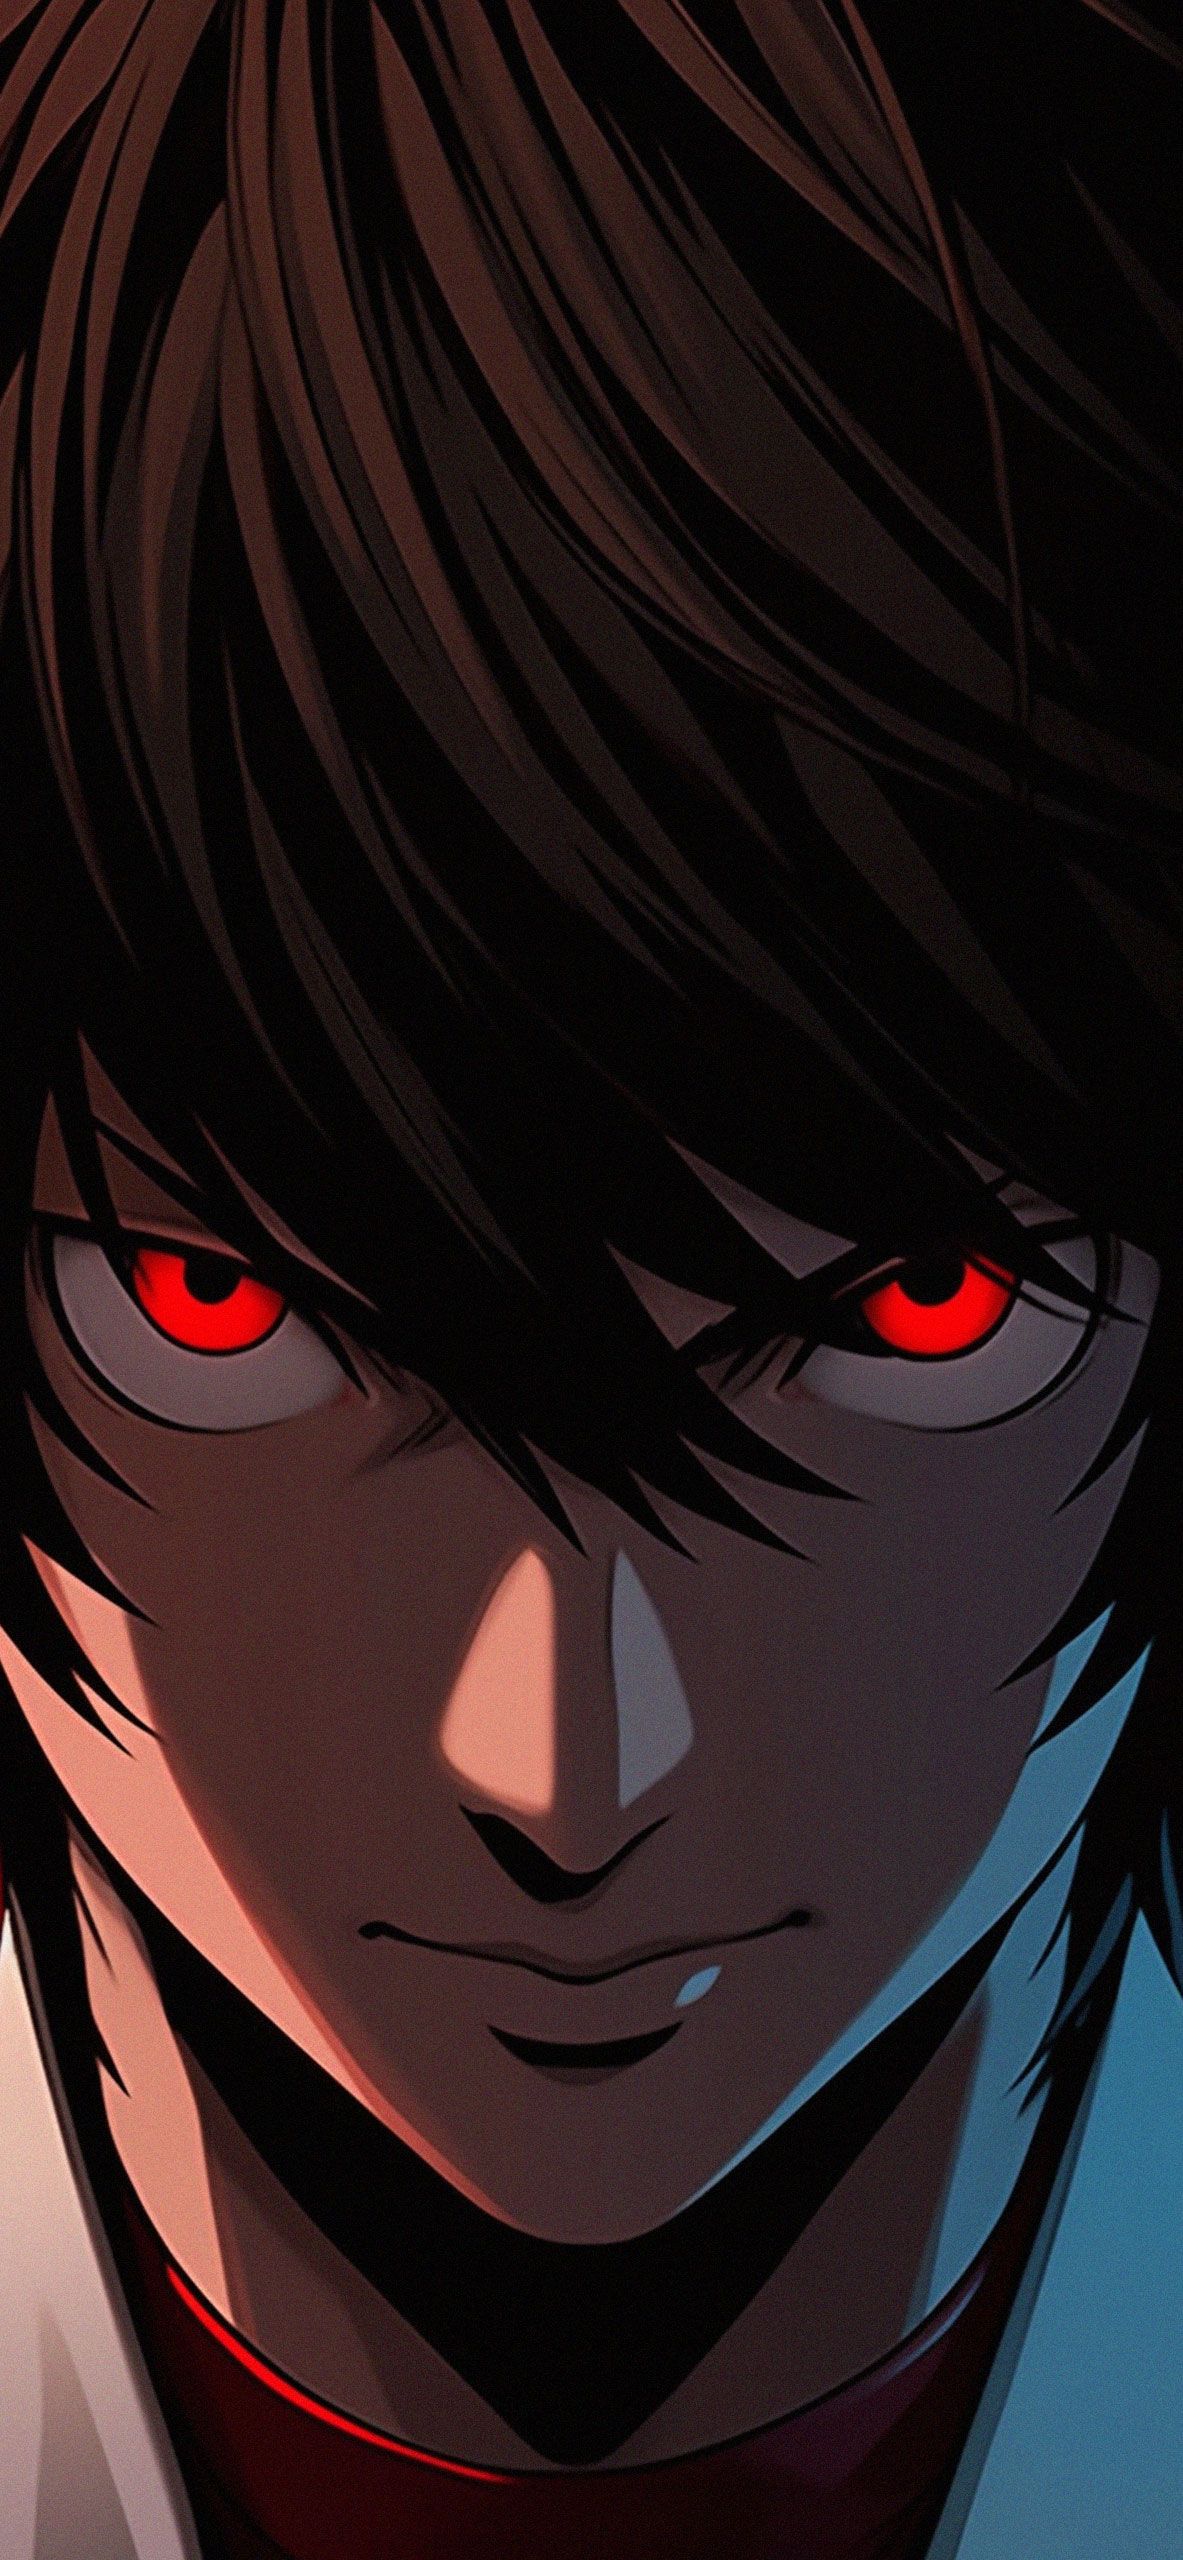 Death note anime phone wallpaper - Death Note